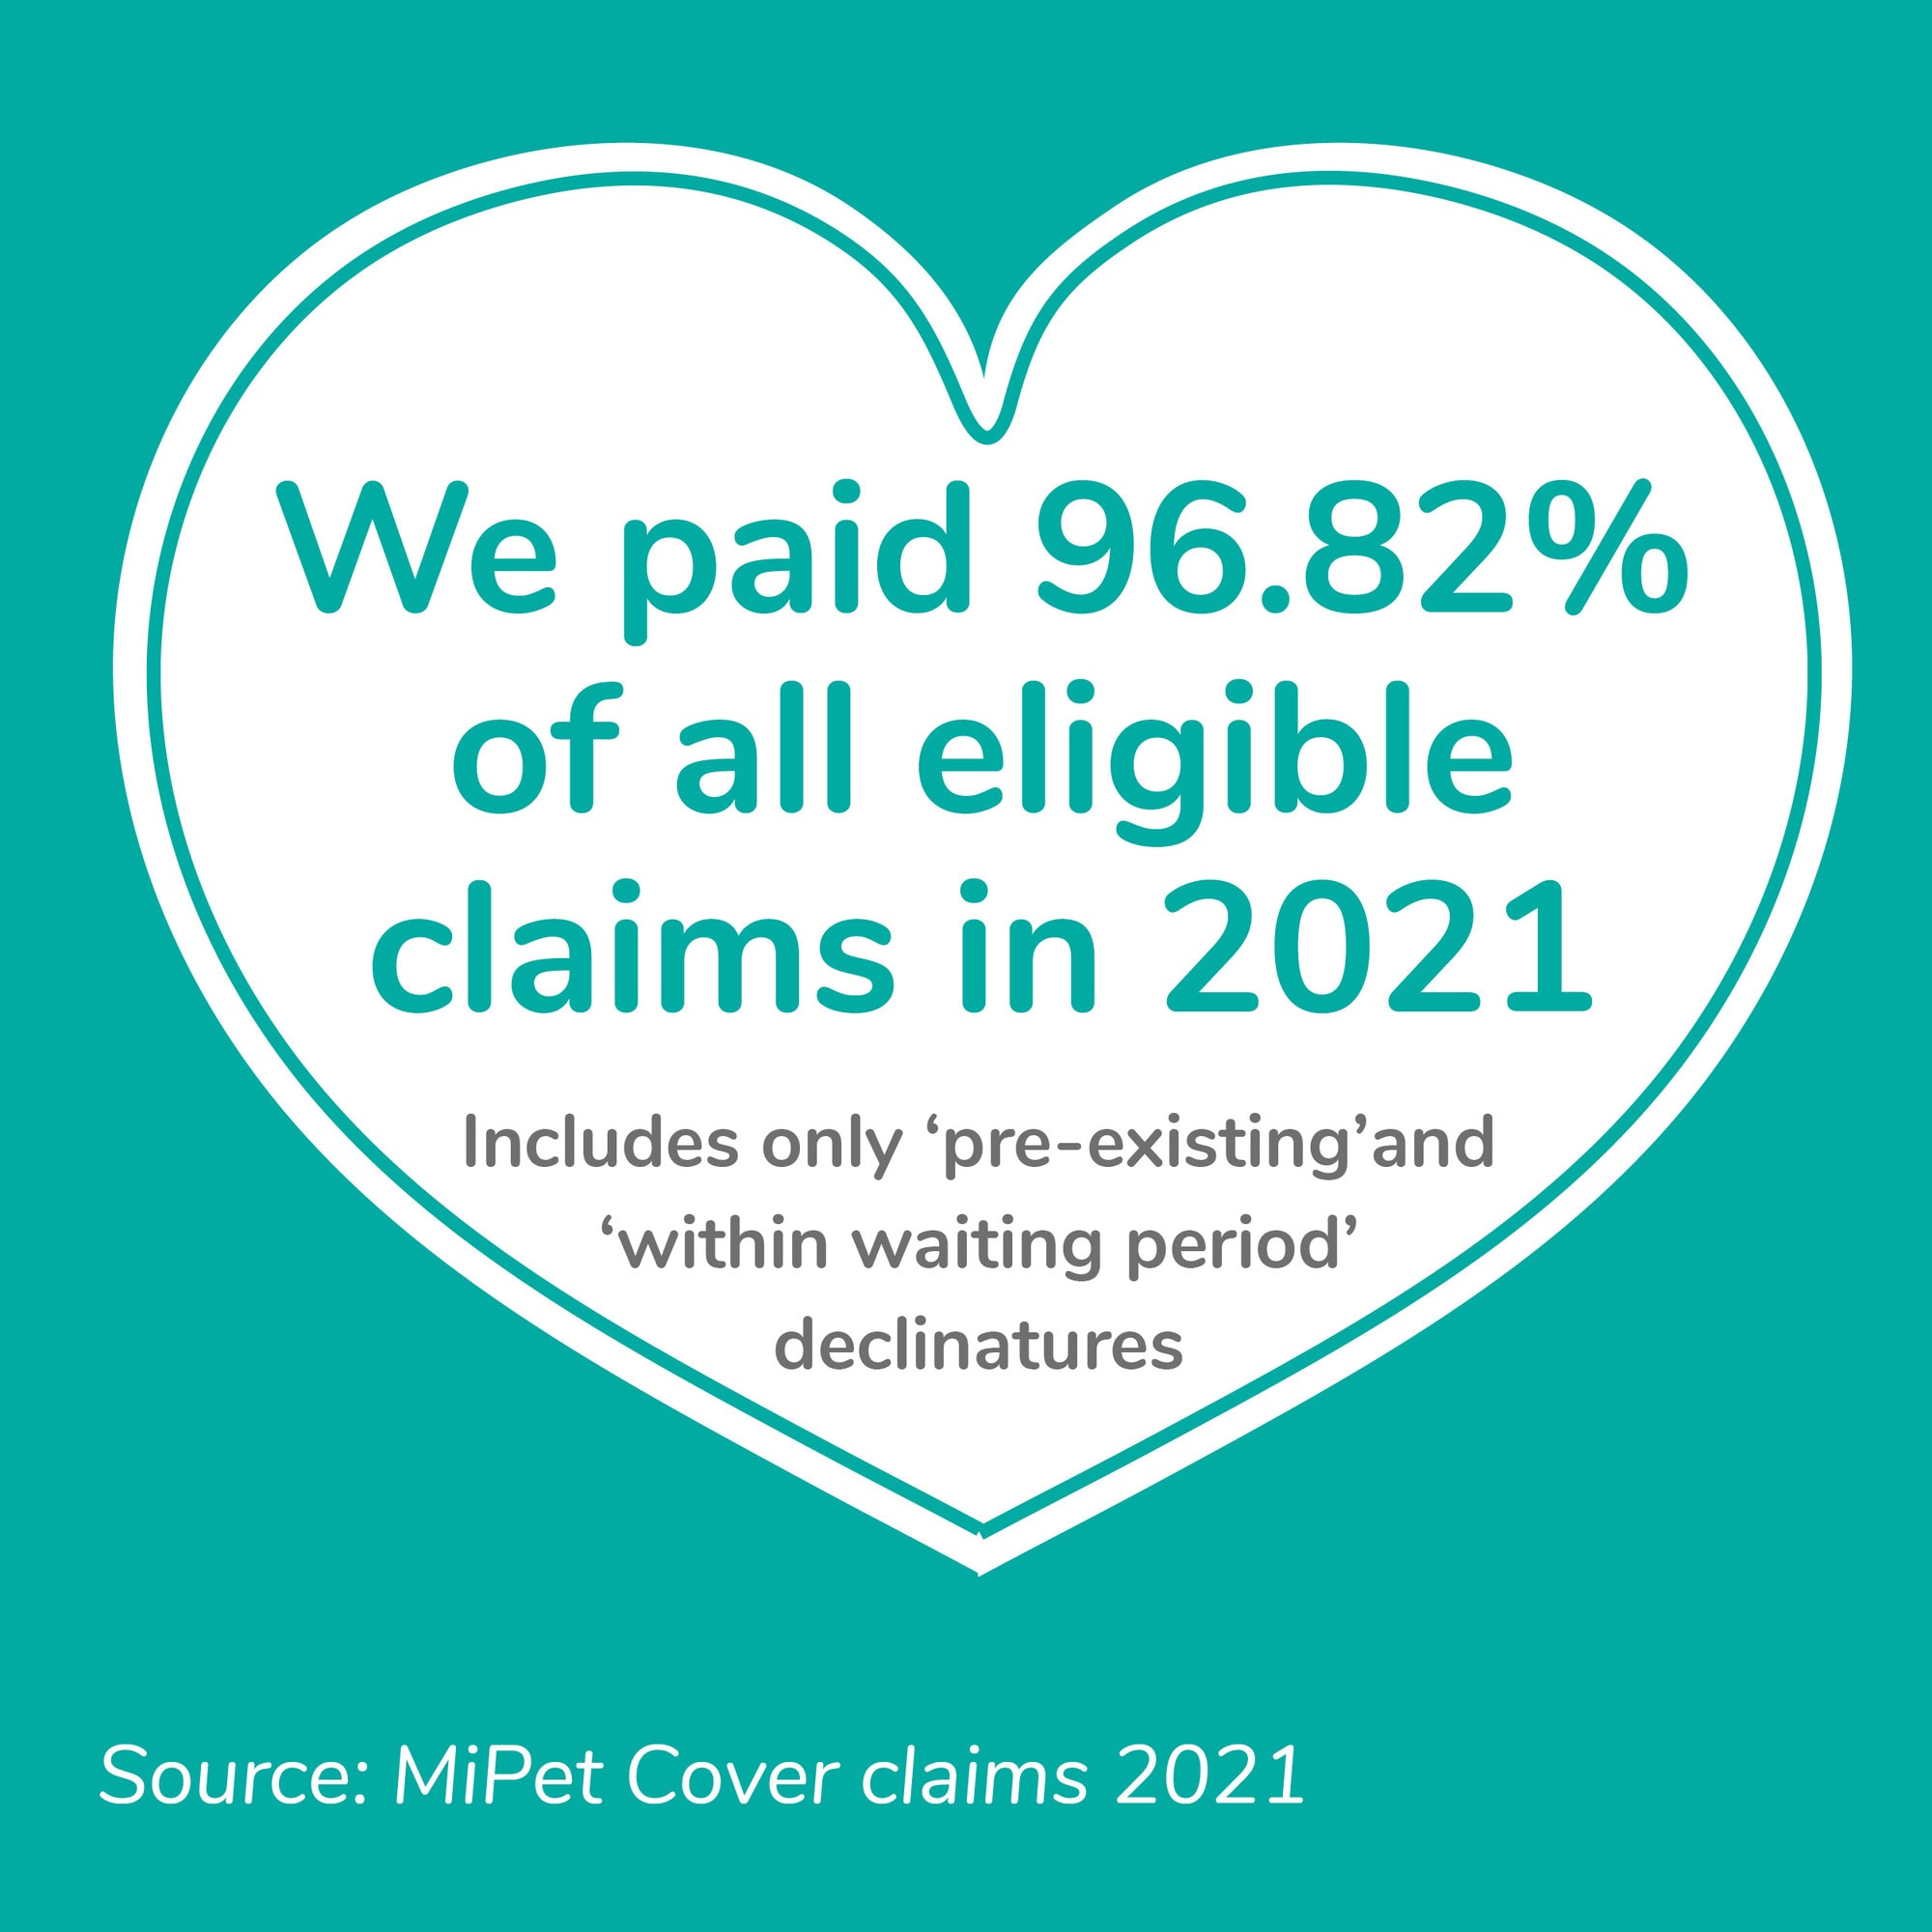 We paid 96.82% of claims in 2021